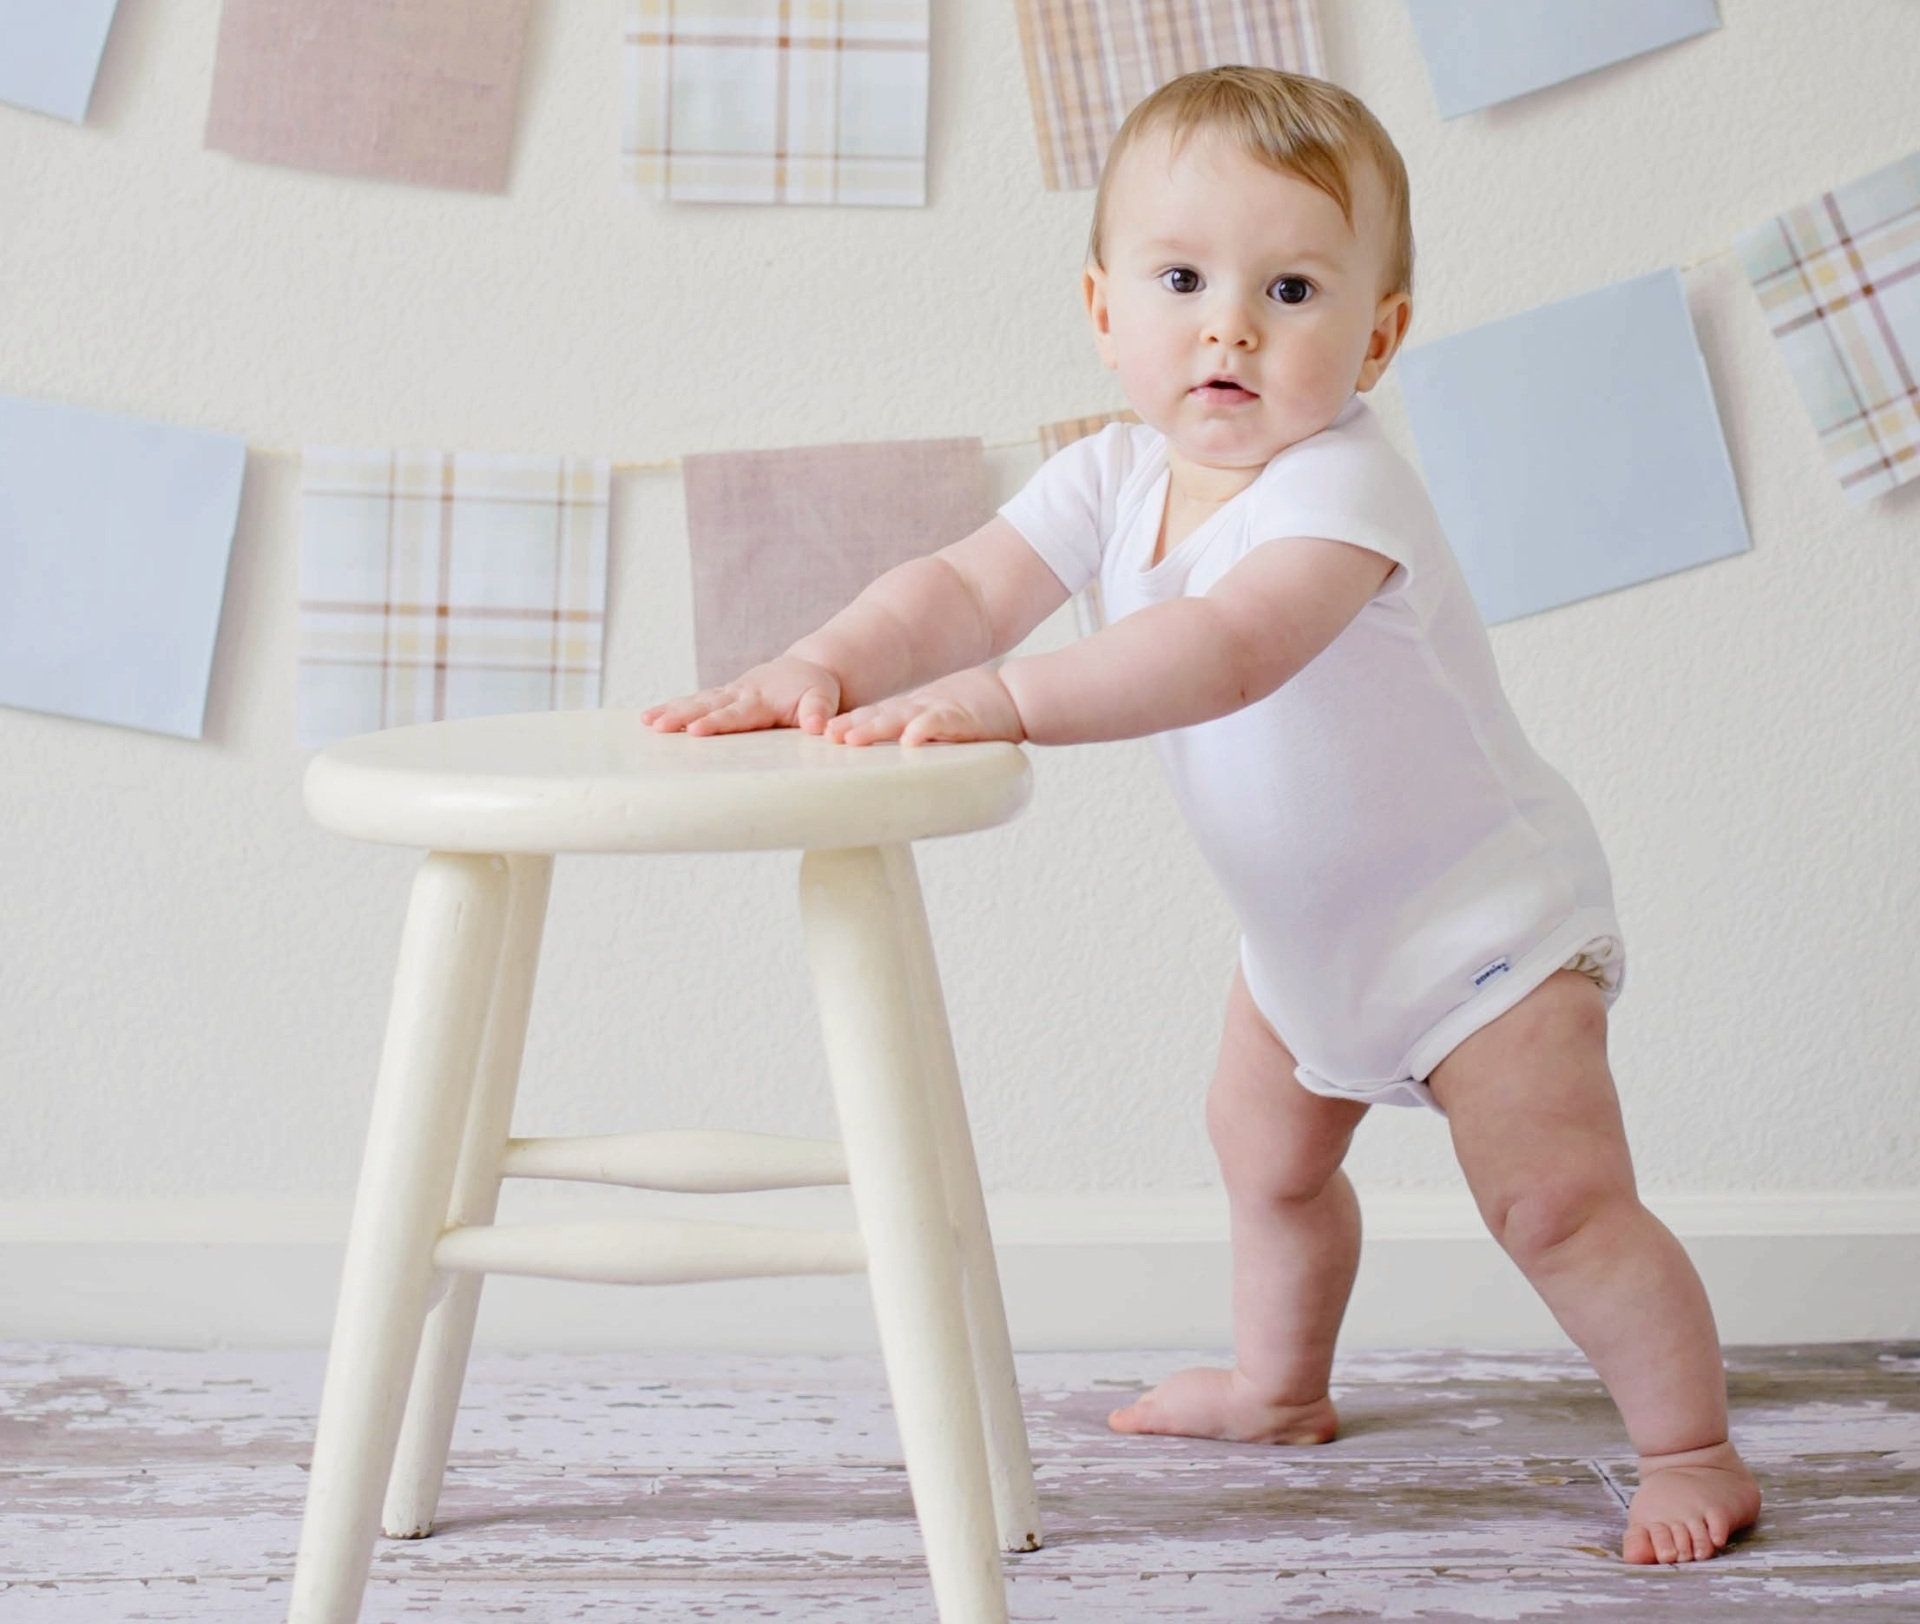 baby standing  with hands on stool  -